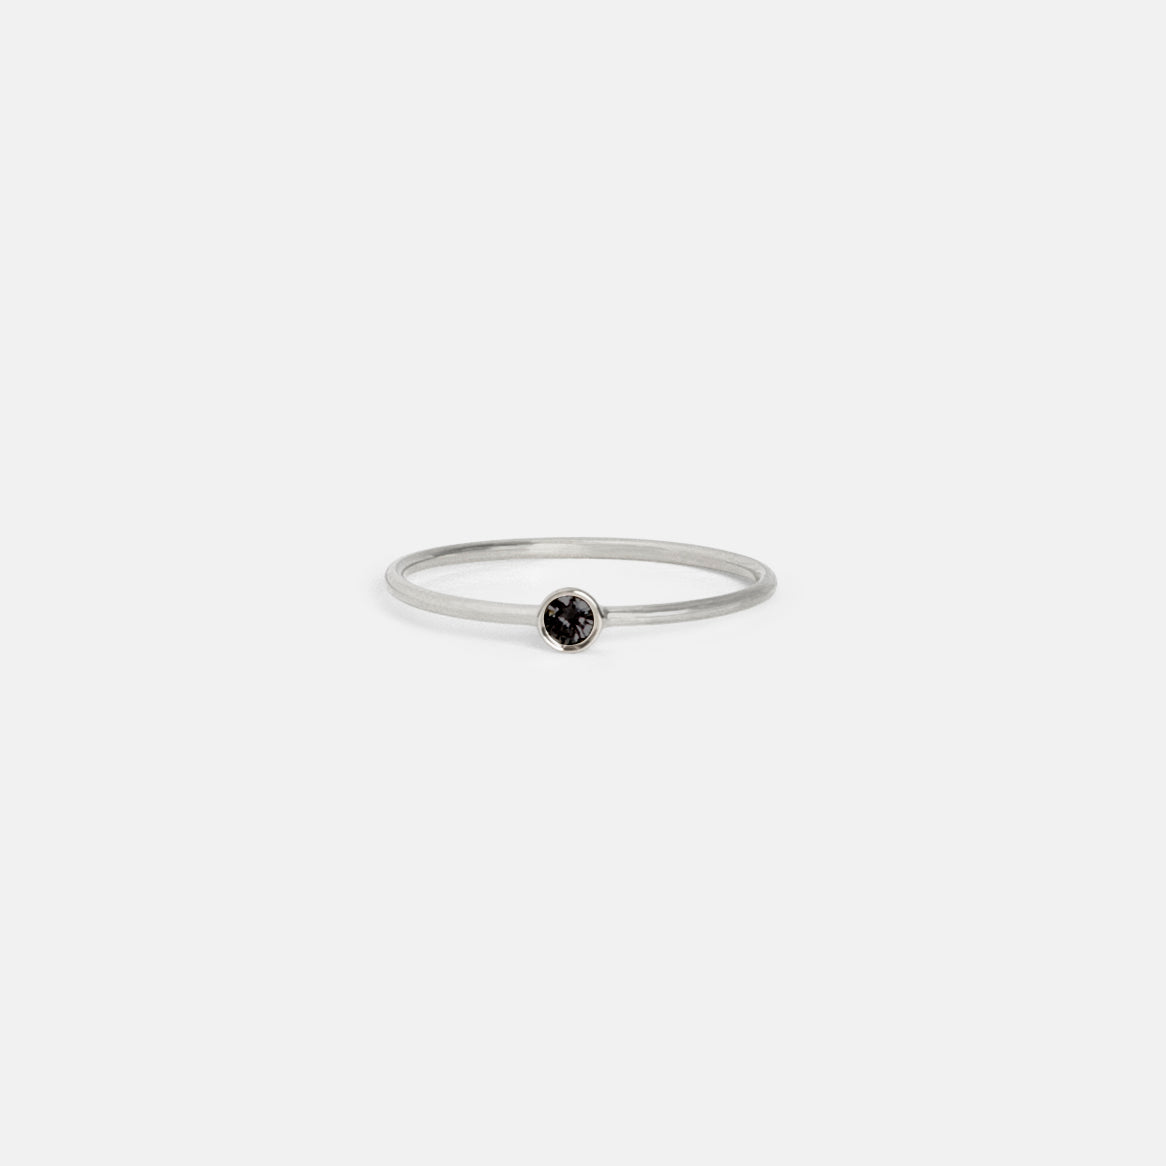 Plain Large Kaya Ring in 14k White Gold set with black Diamond by SHW Fine Jewelry in NYC